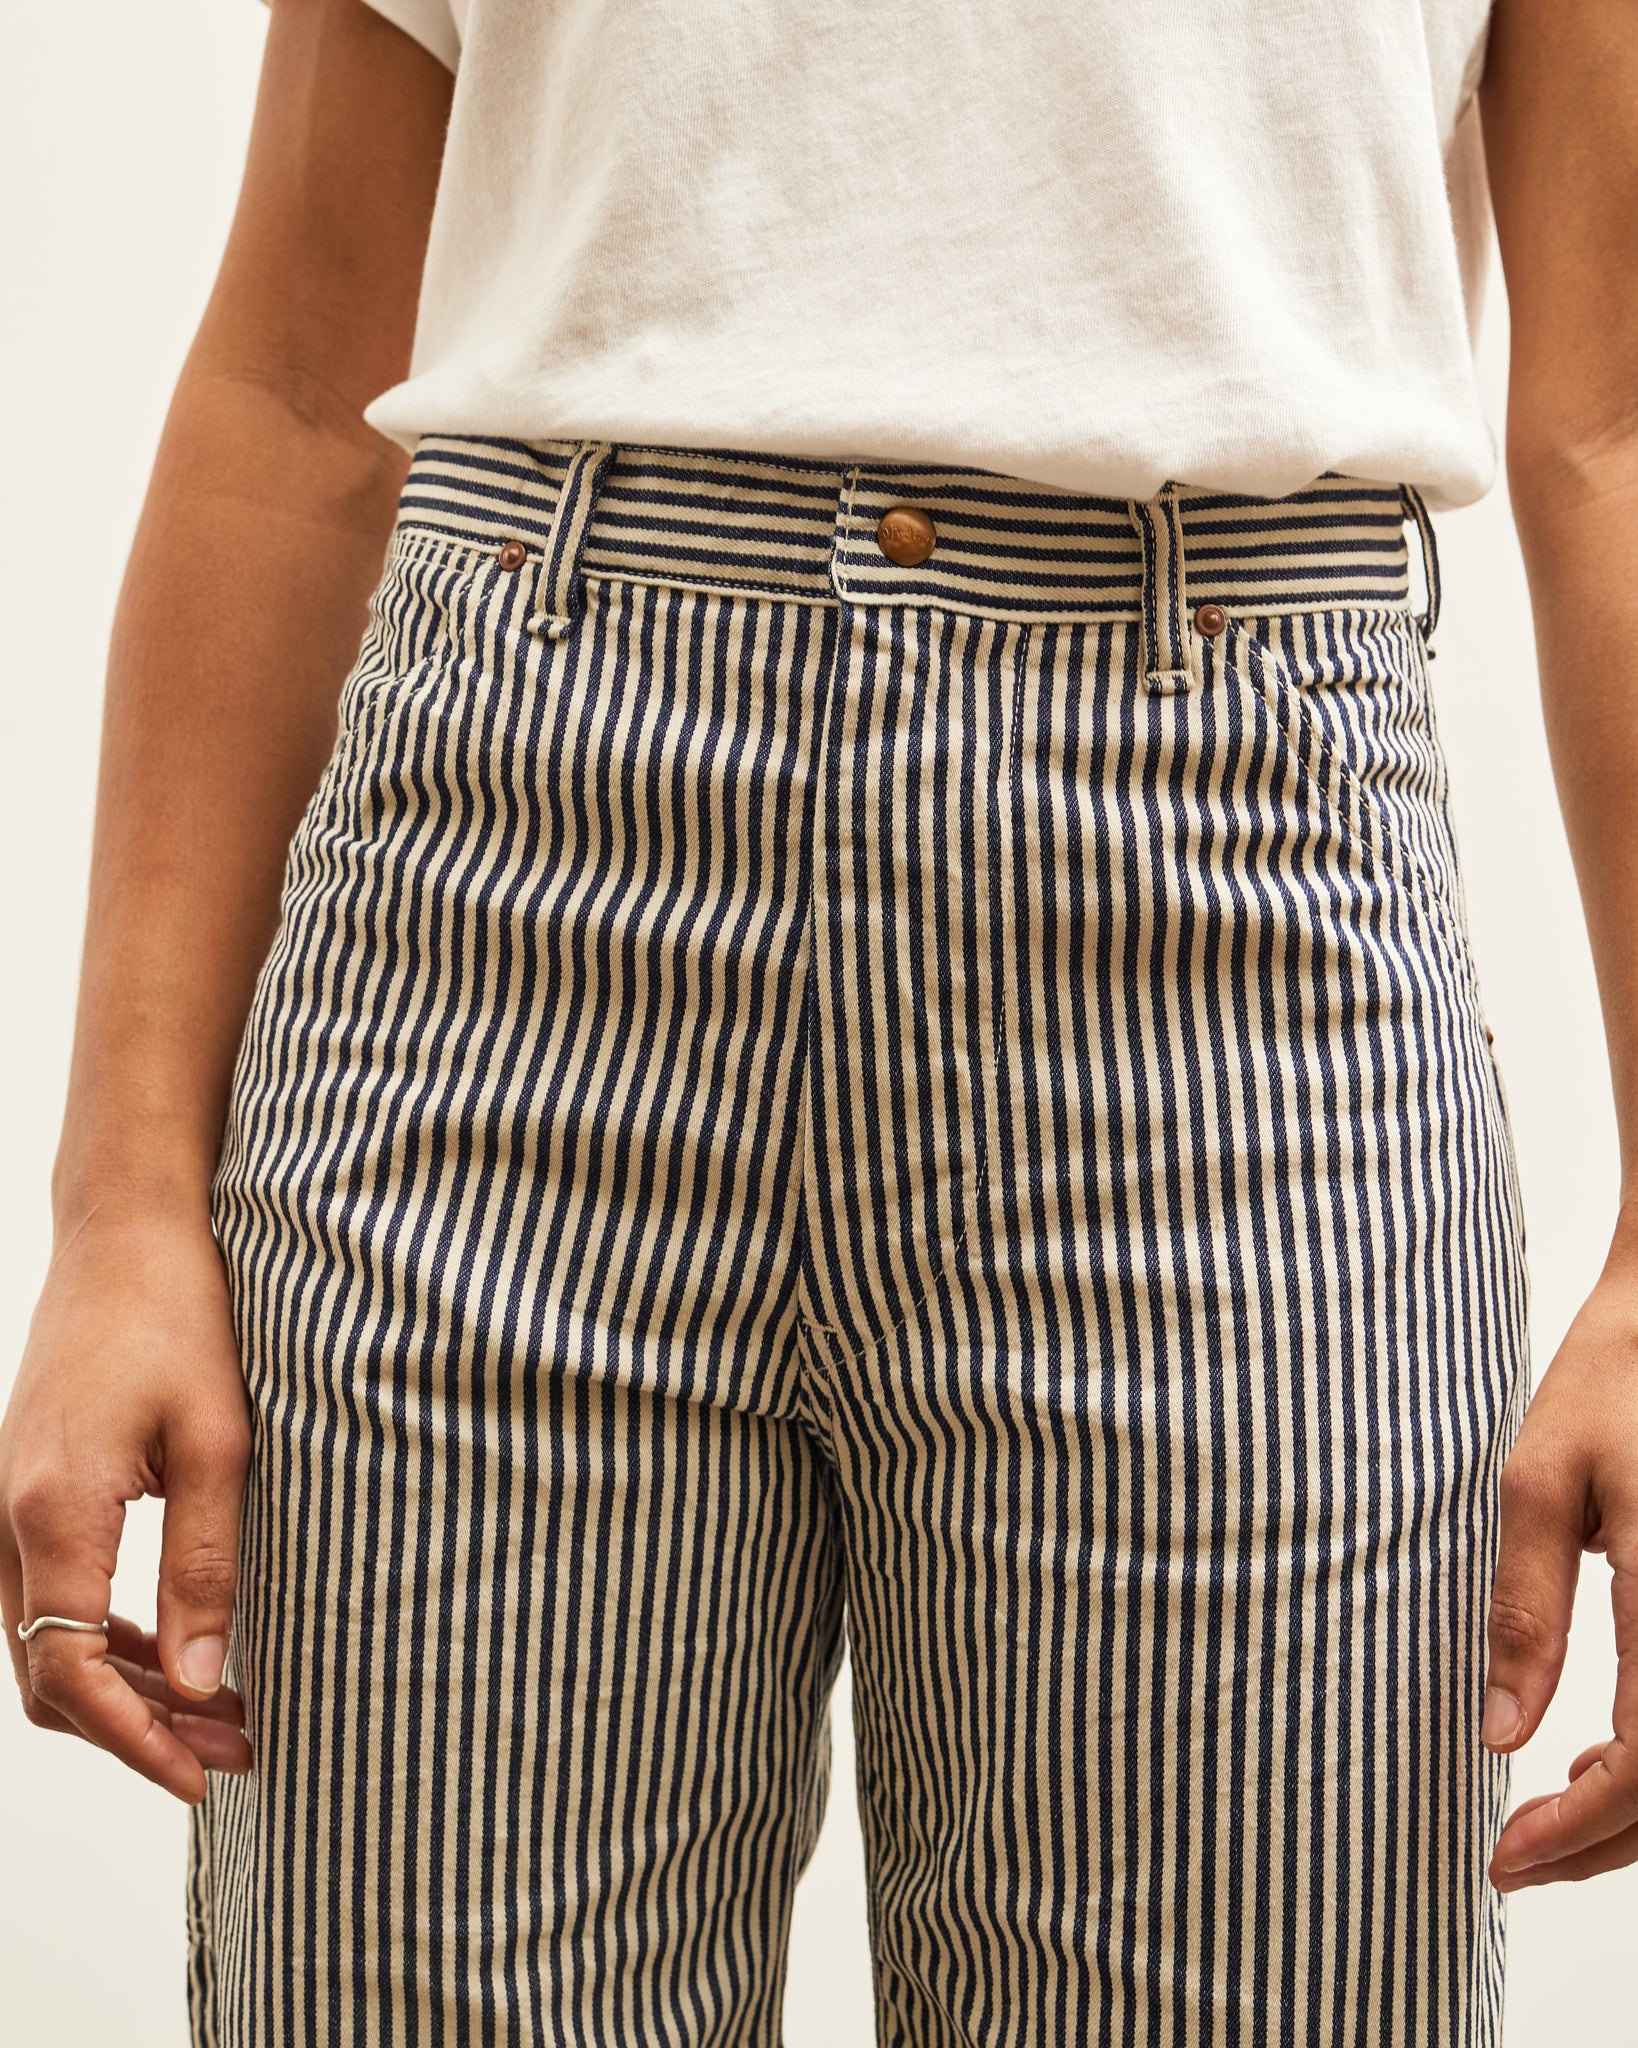 orSlow 1930's Painters Pants, Hickory Stripe